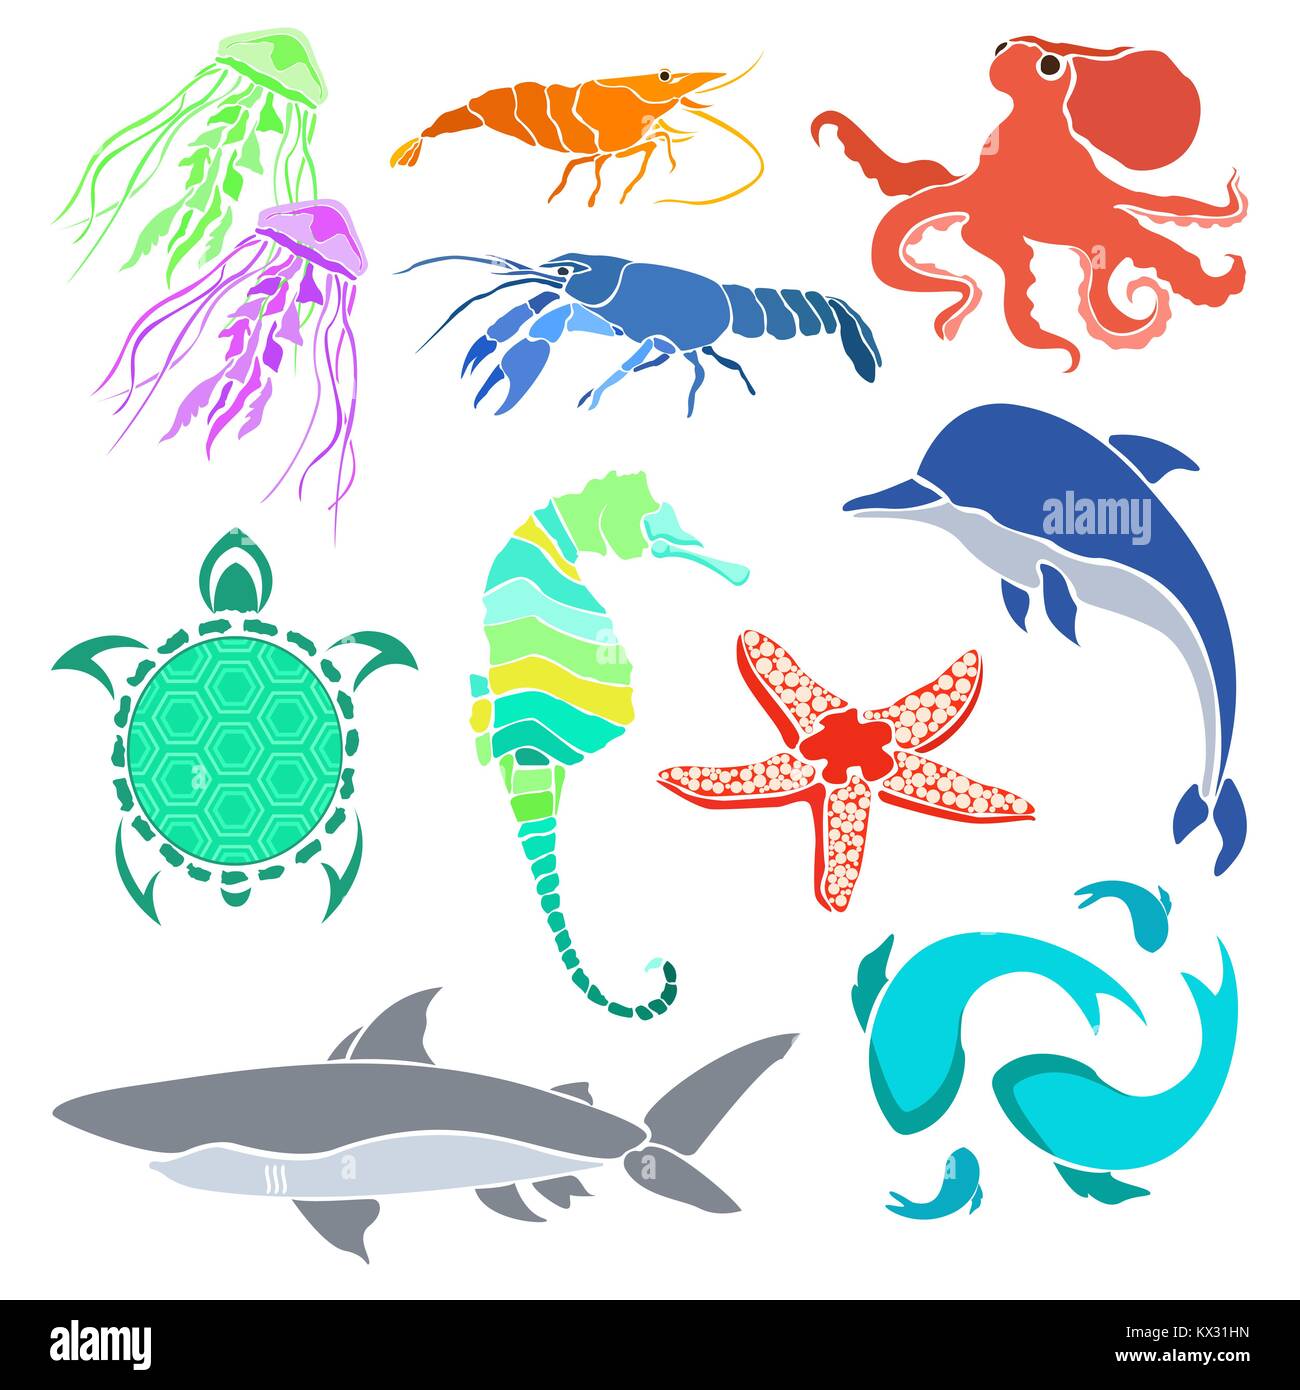 Silhouettes of various sea creatures. Shrimp, cancer, jellyfish, seahorse, fish and other creatures isolated on white background. Vector illustration. Stock Vector